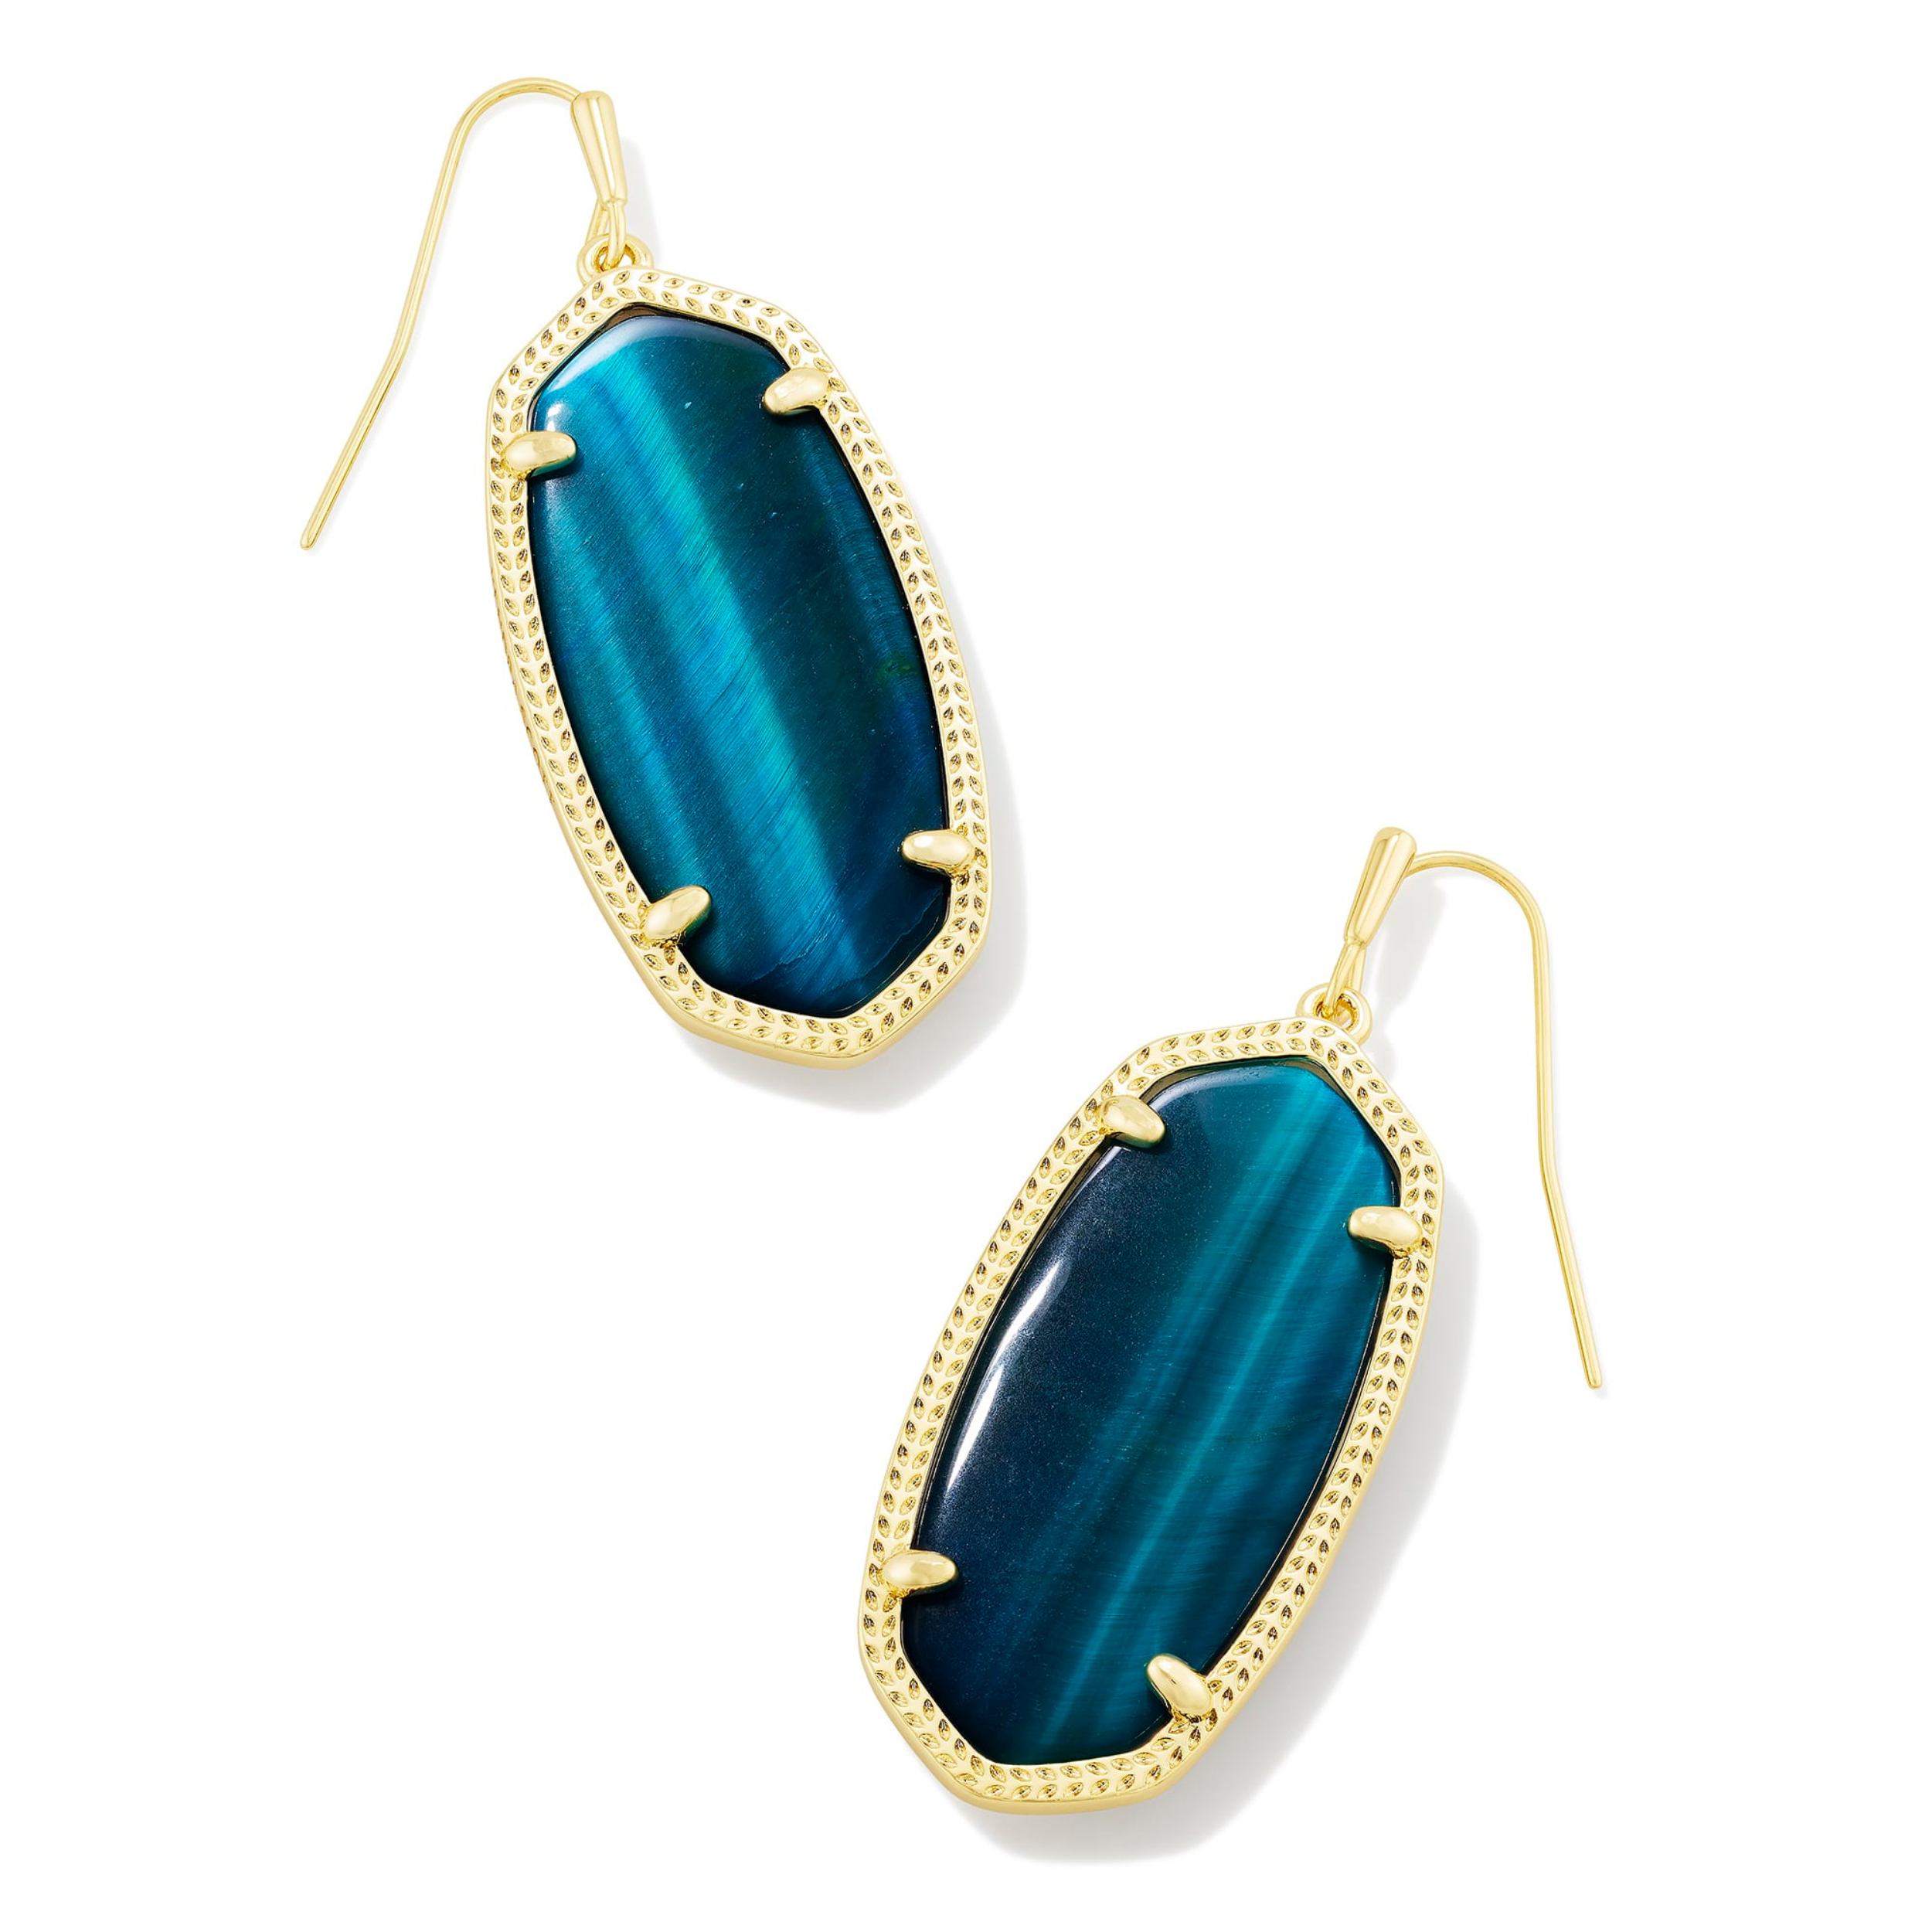 Pictured is a pair of gold, elle drop earrings with teal tiger's eye stones. These earrings are pictured on a white background.   